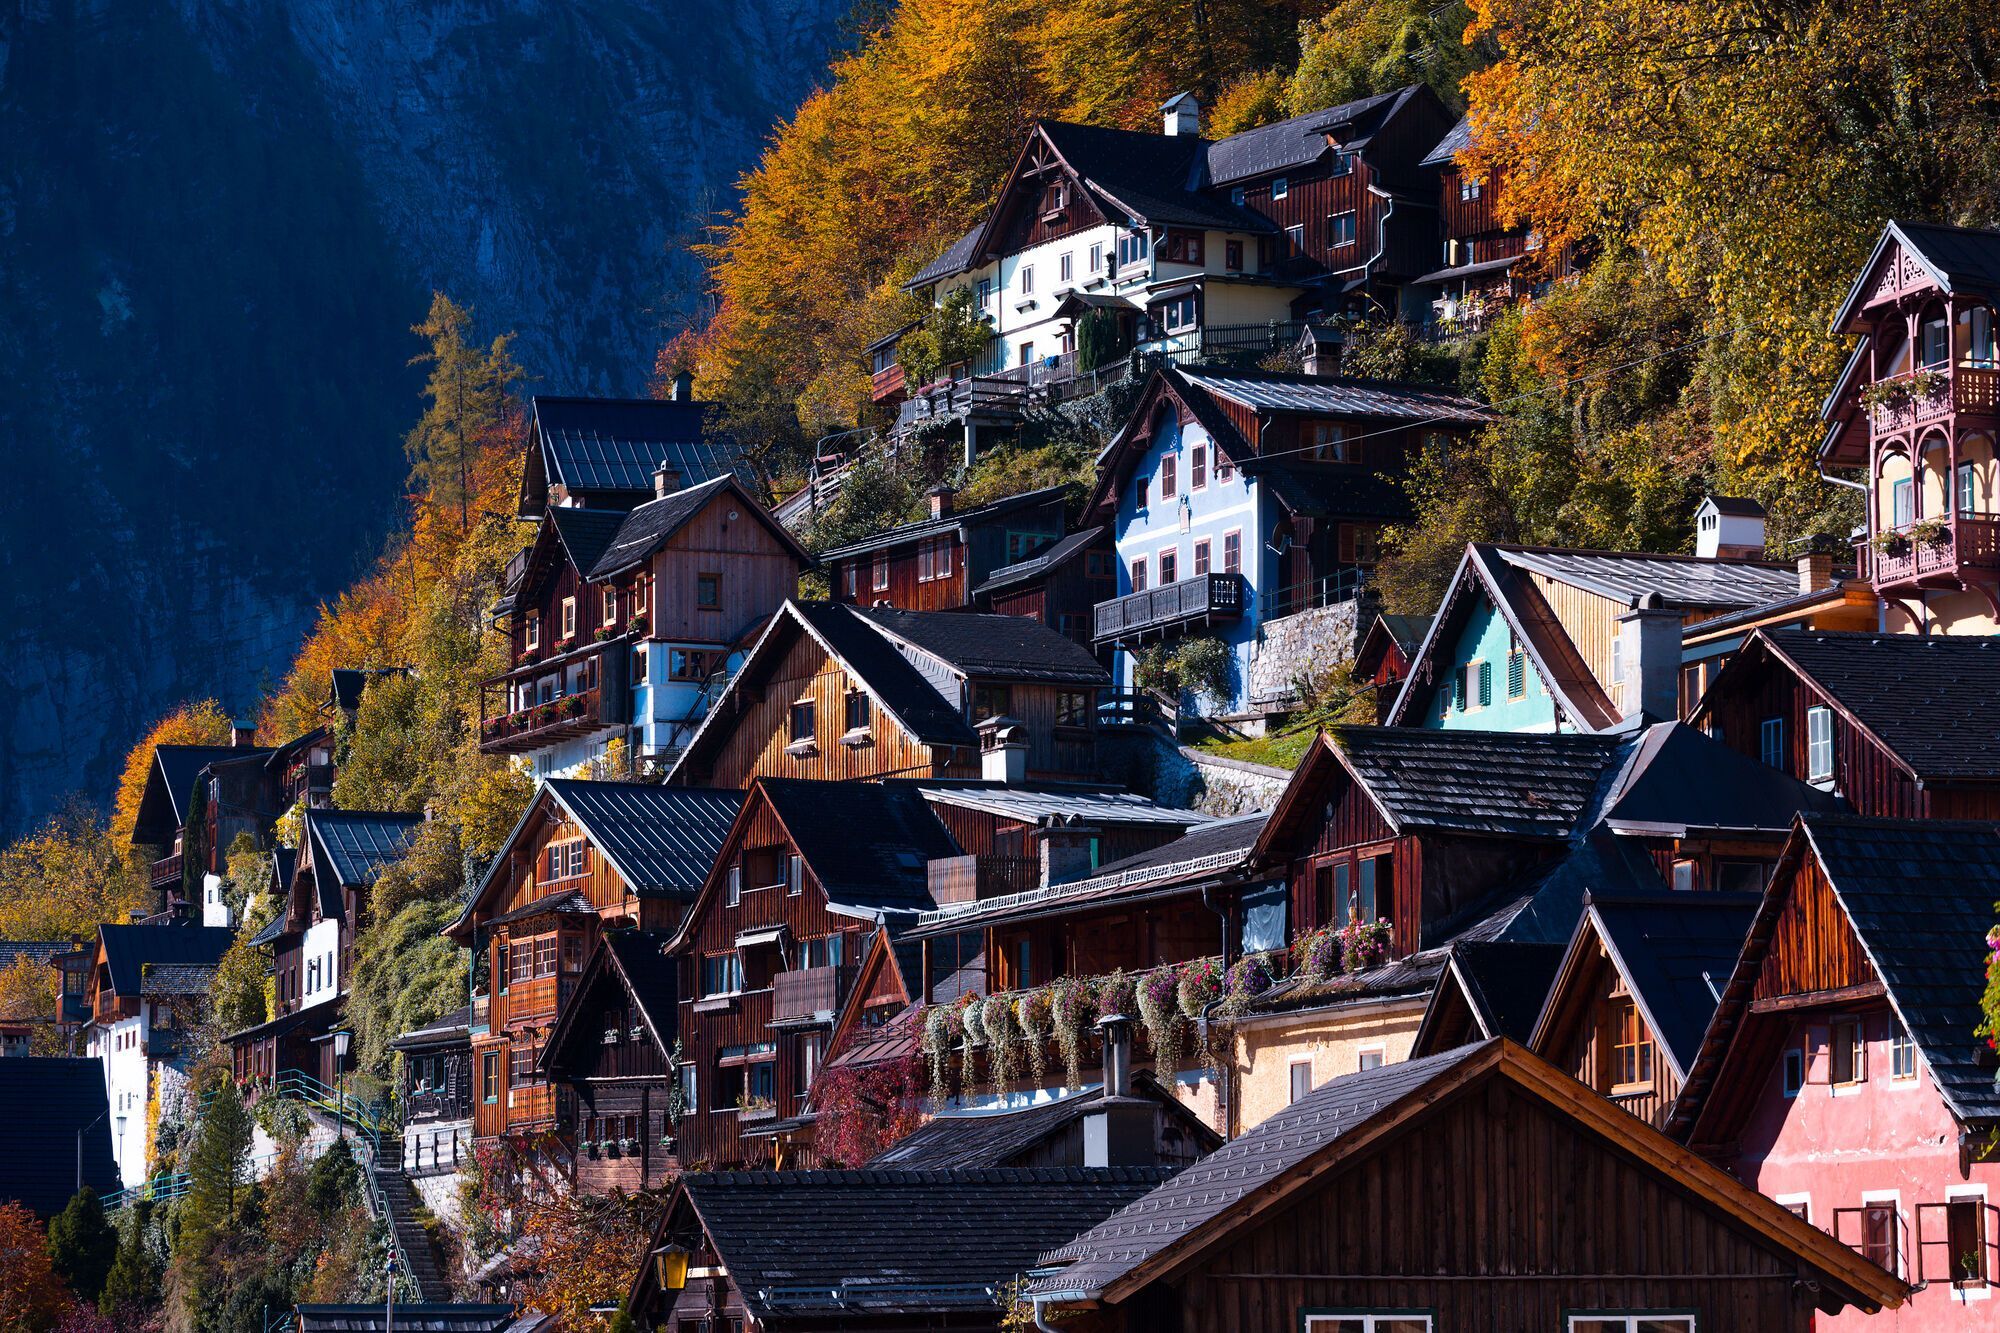 Not only sea: European mountain towns worth visiting